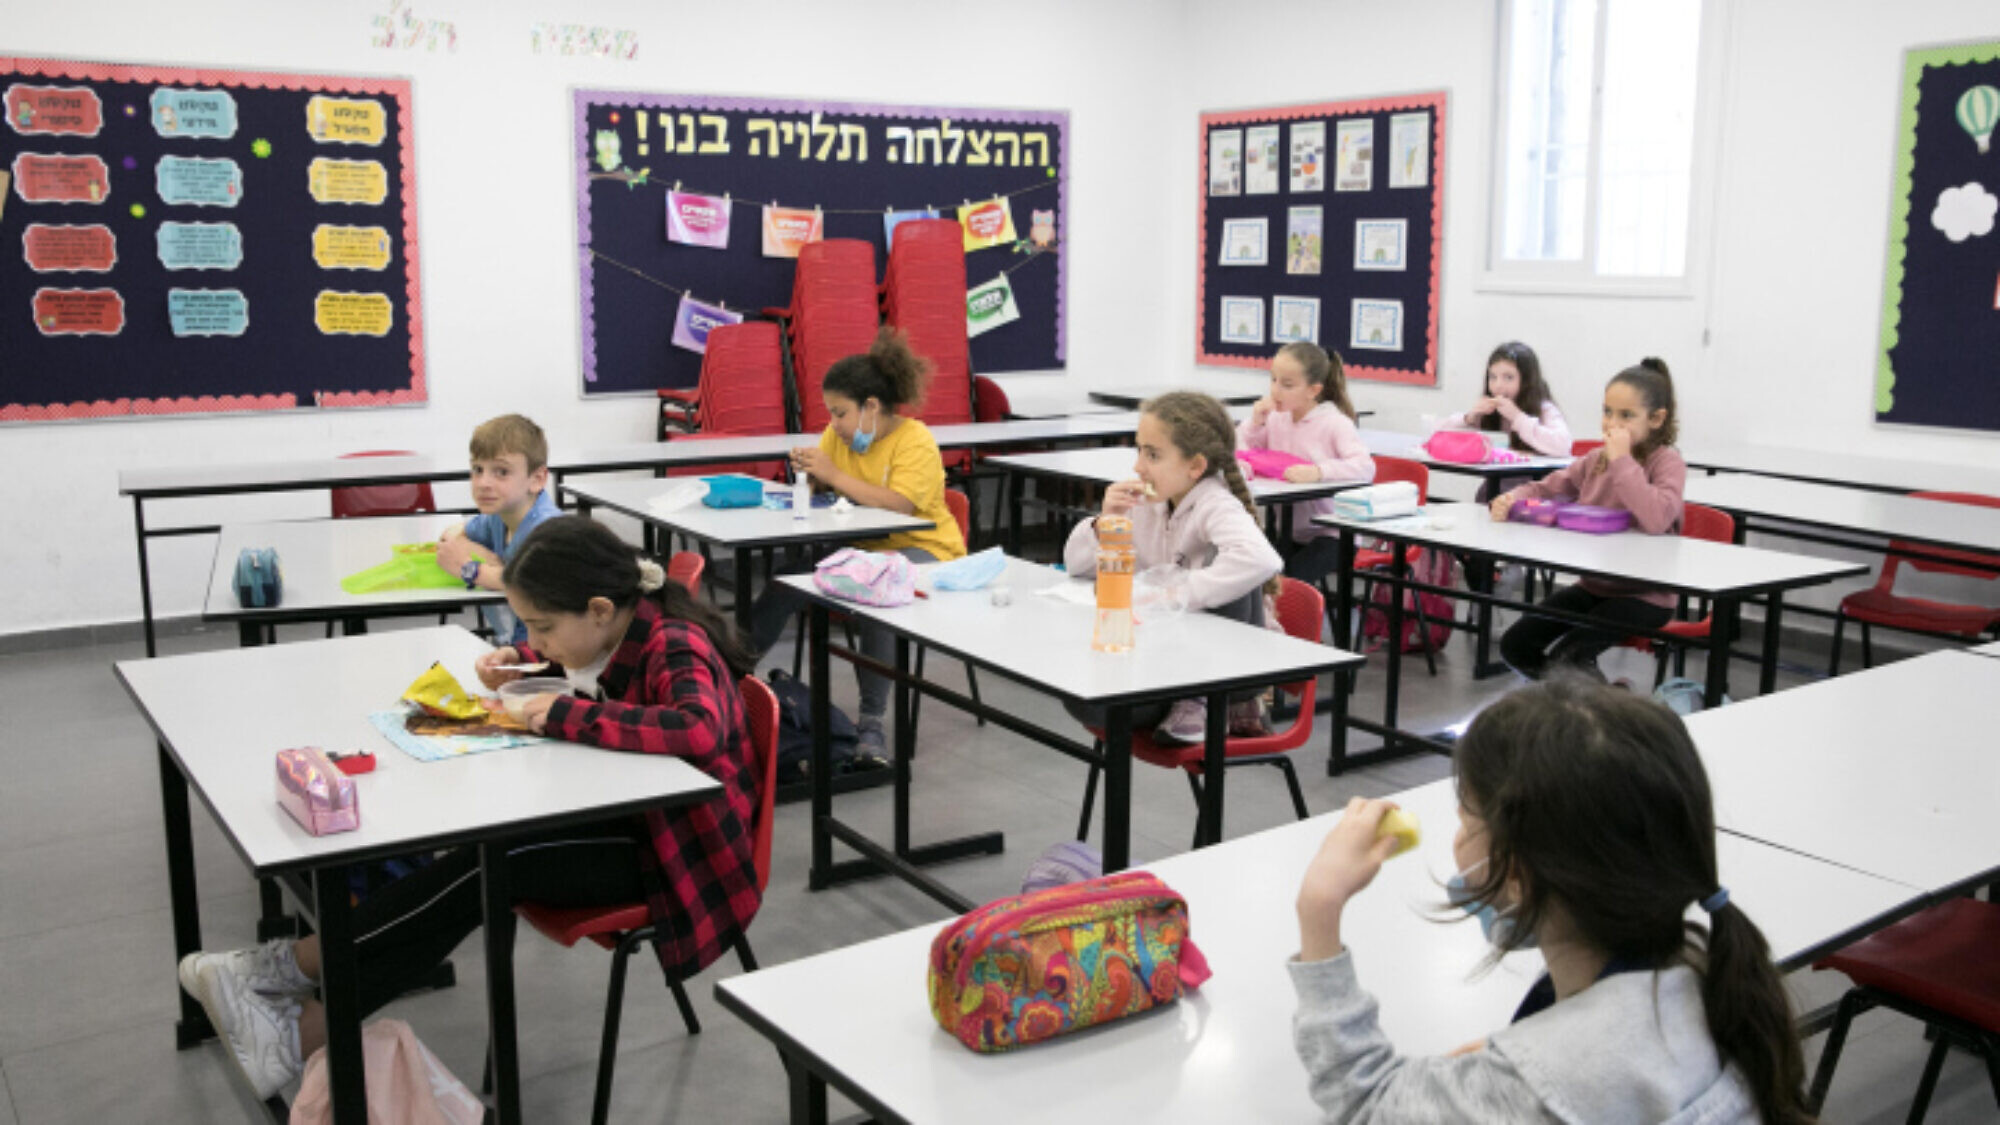 Israeli kids head back to class as schools cautiously reopen - JNS.org